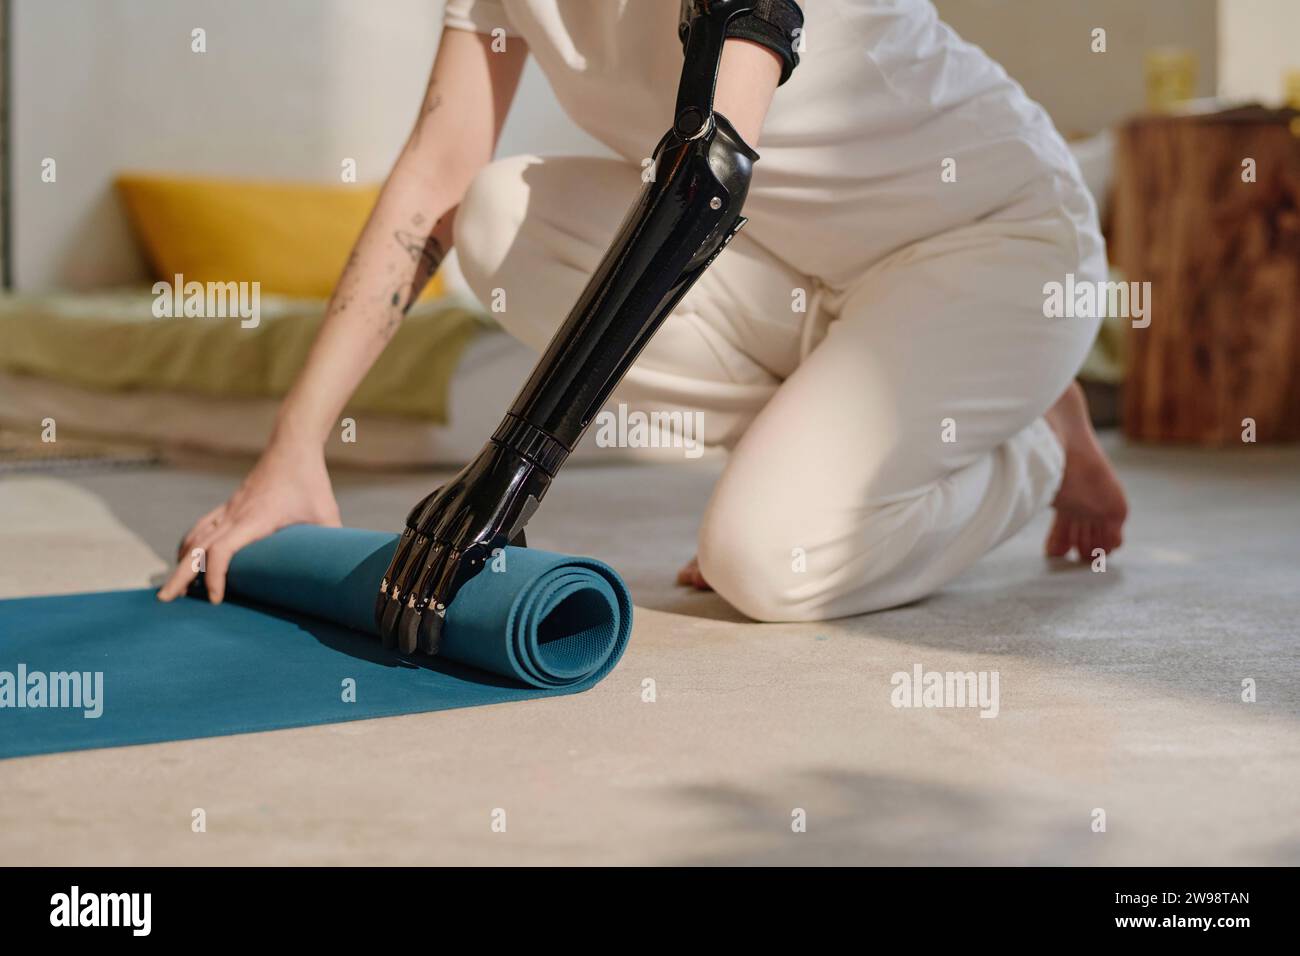 Young woman with prosthetic arm rolling out yoga mat to exercise at home Stock Photo